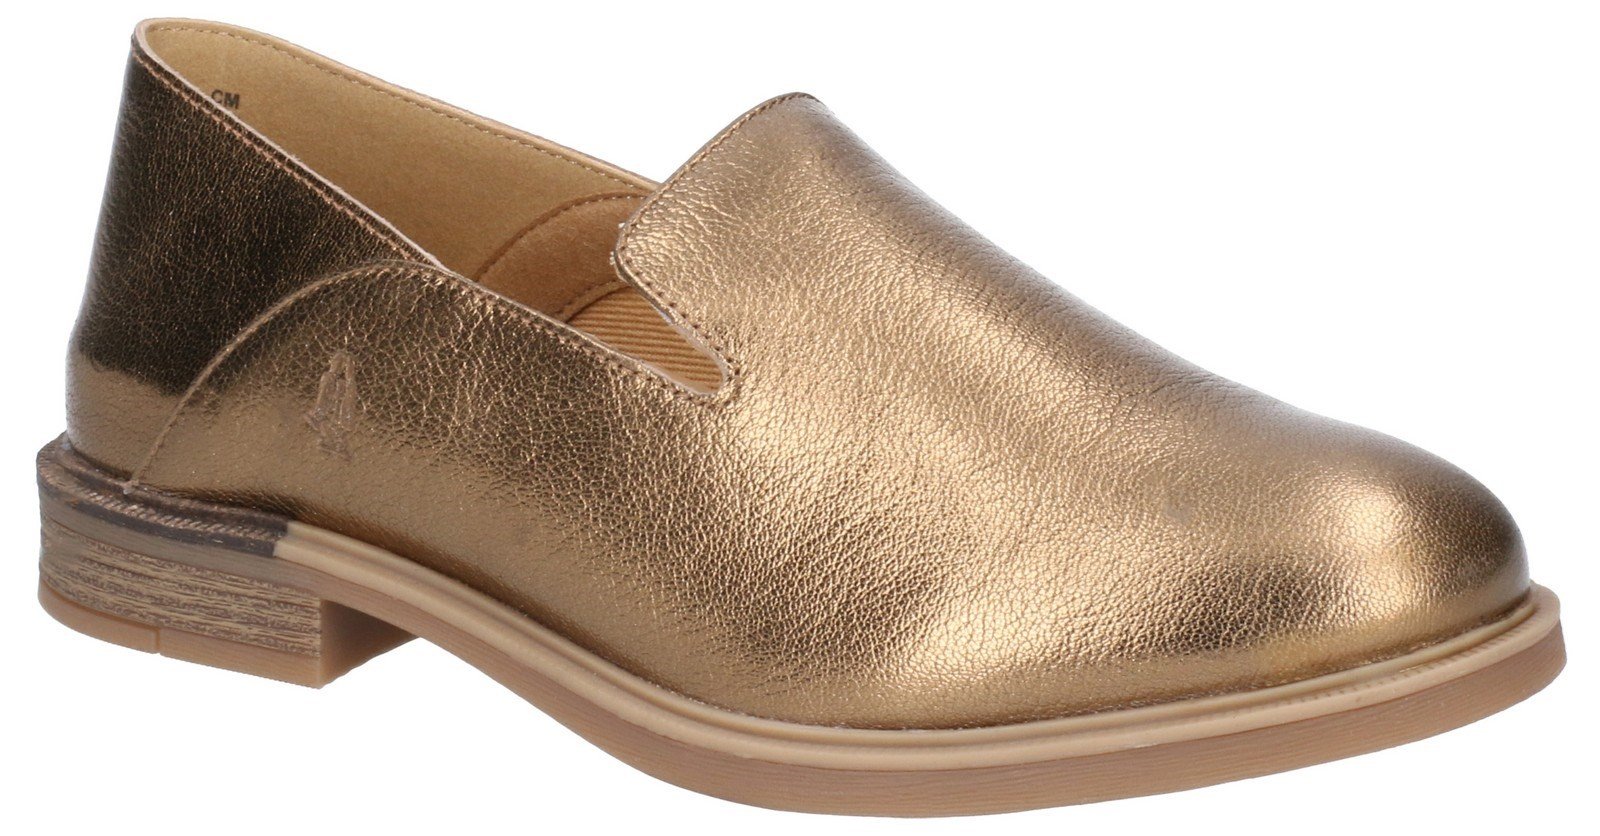 Hush Puppies Women's Bailey Bounce Slip On Flats Various Colours 29224 - Antique Gold Leather 3